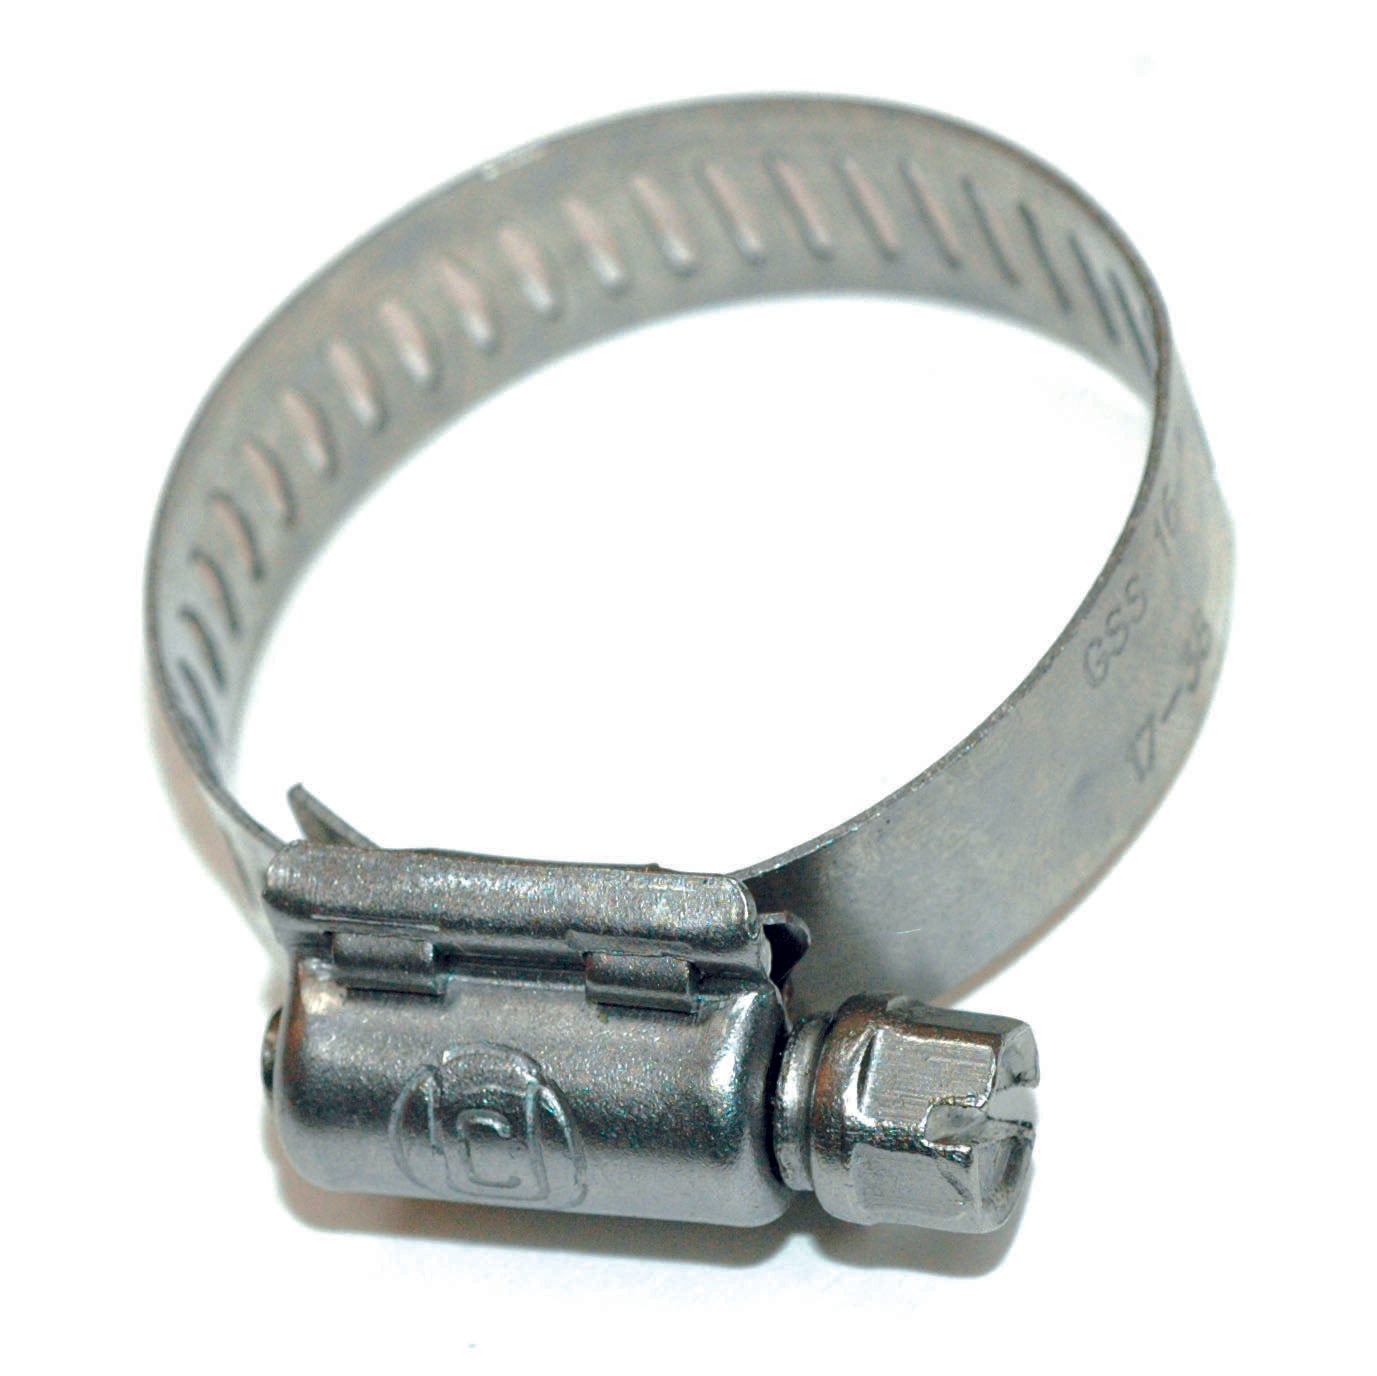 Stainless steel hose clamp fitting